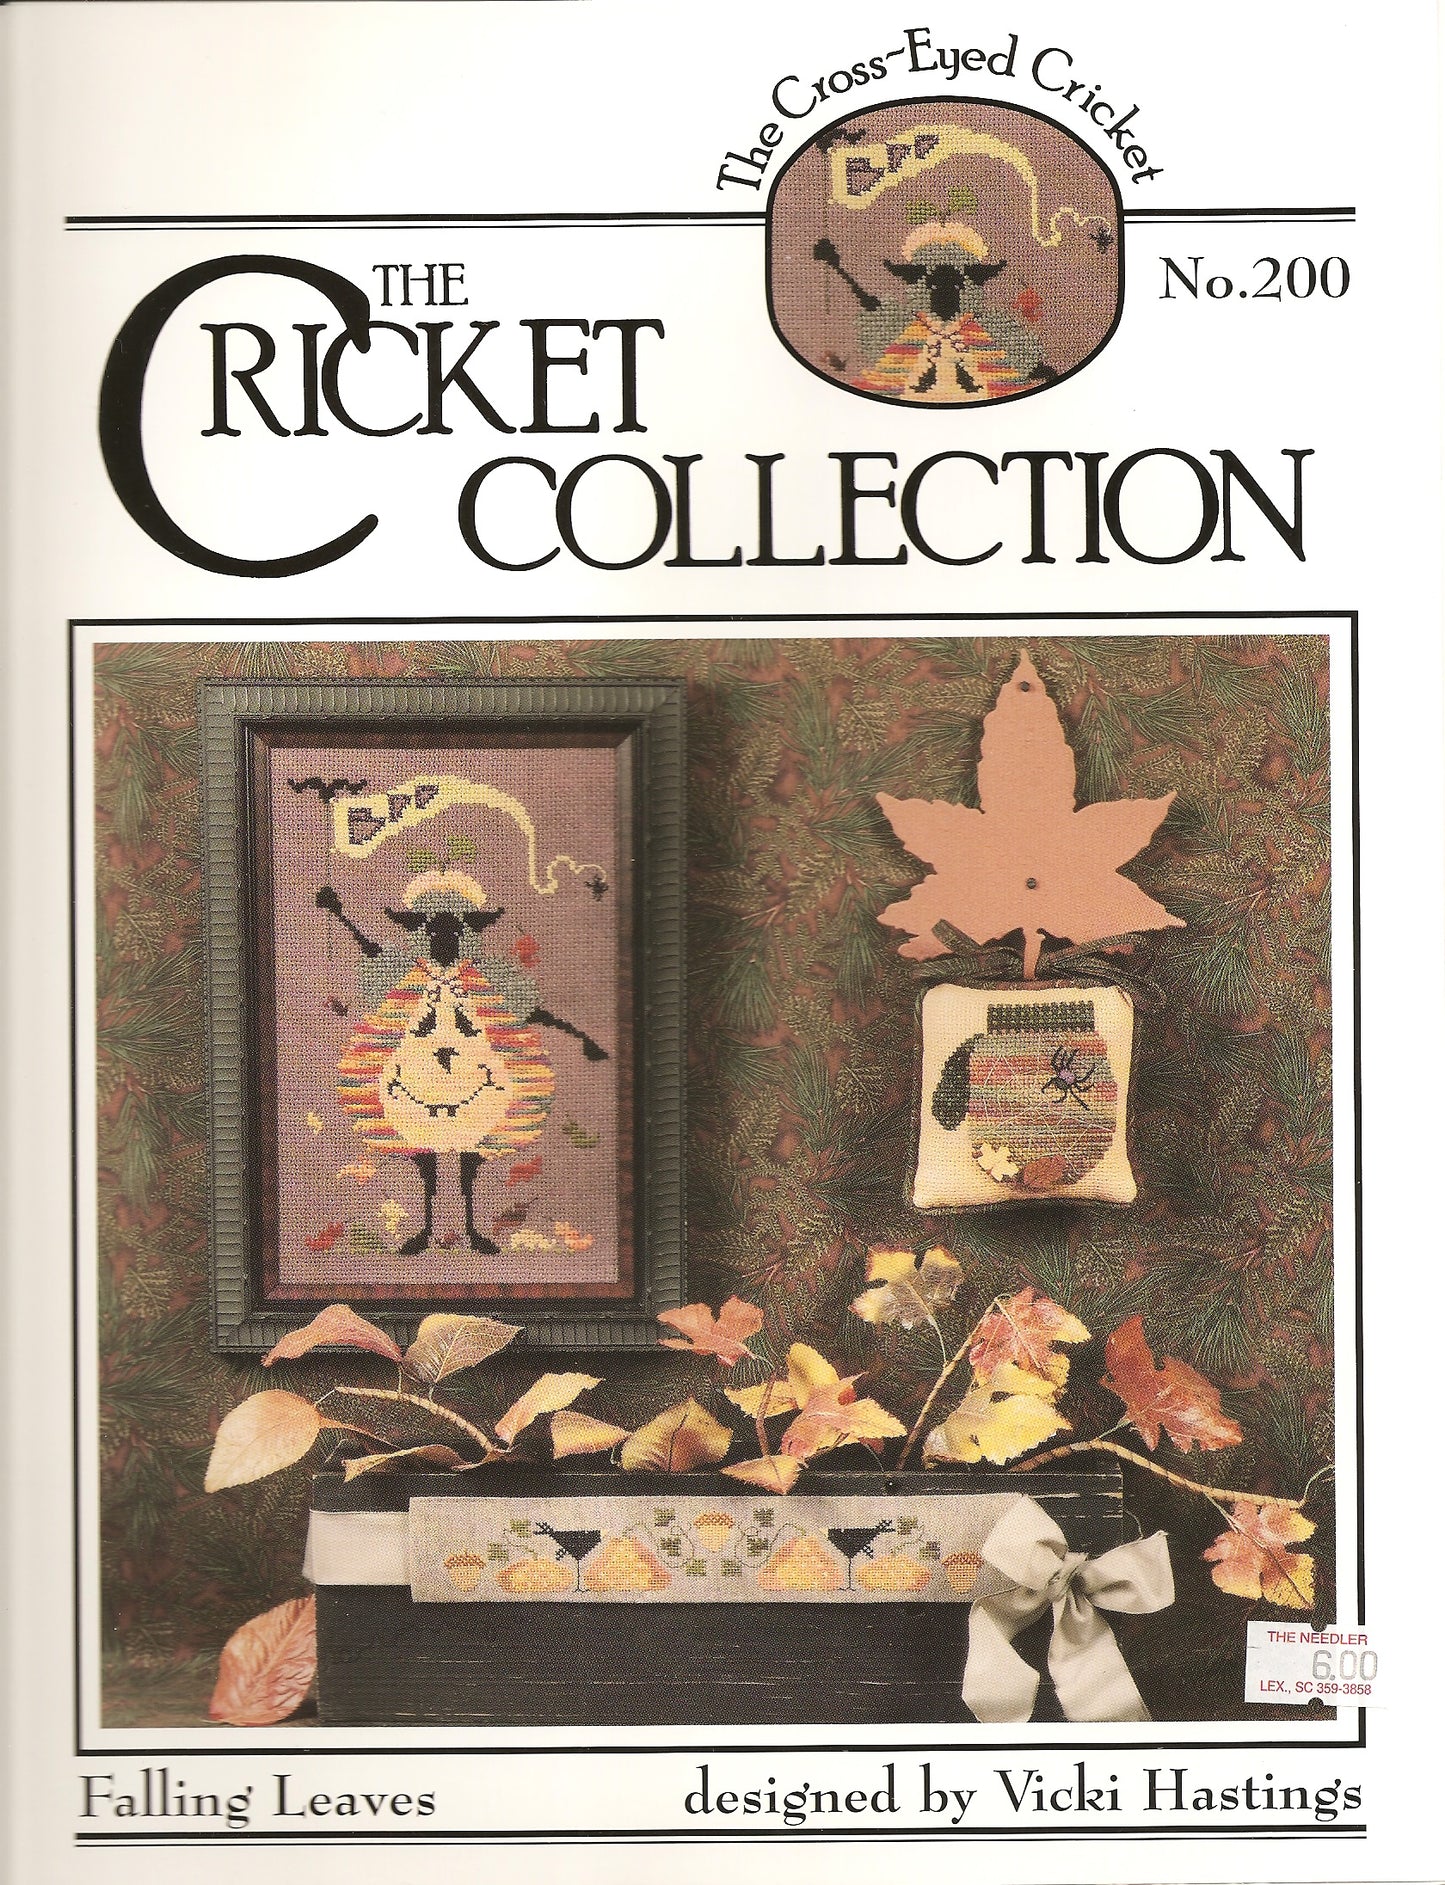 Cricket Collection number 200 Falling Leaves cross stitch pattern